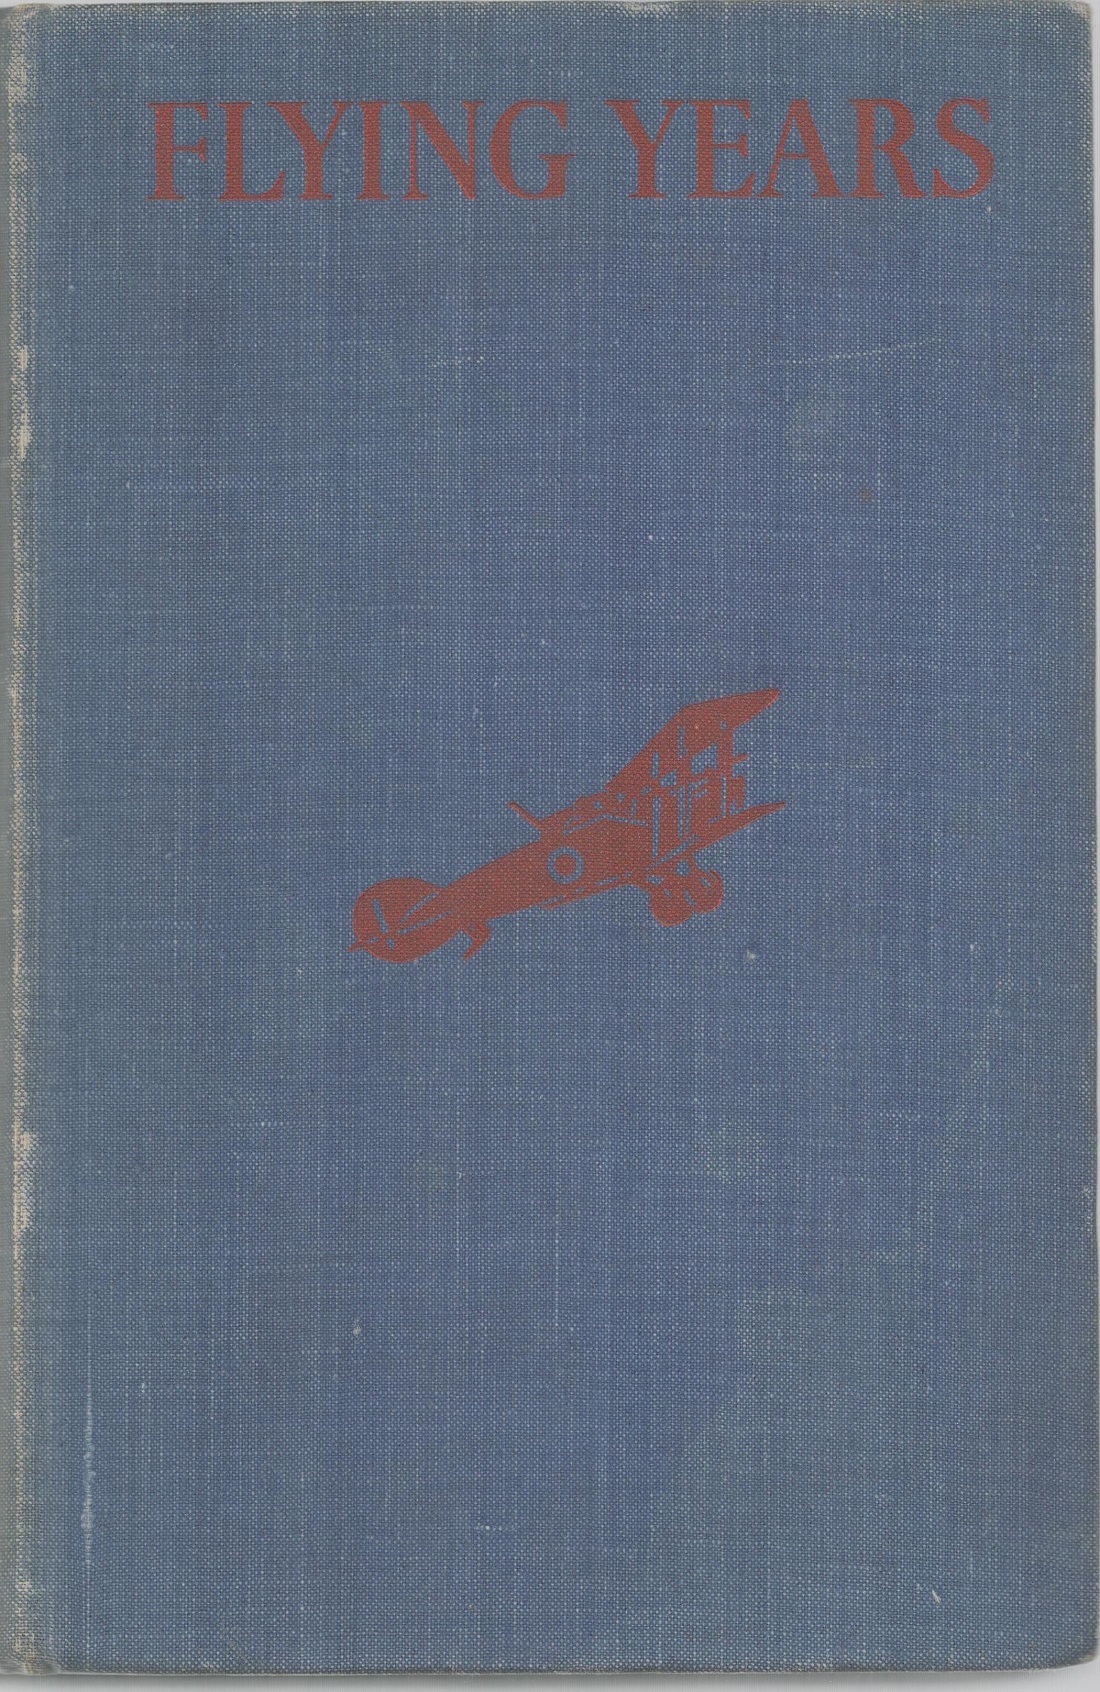 Wing Commander C N CARPENTER (29236) RAF Signed Book Flying Years by C H Keith Special Edition